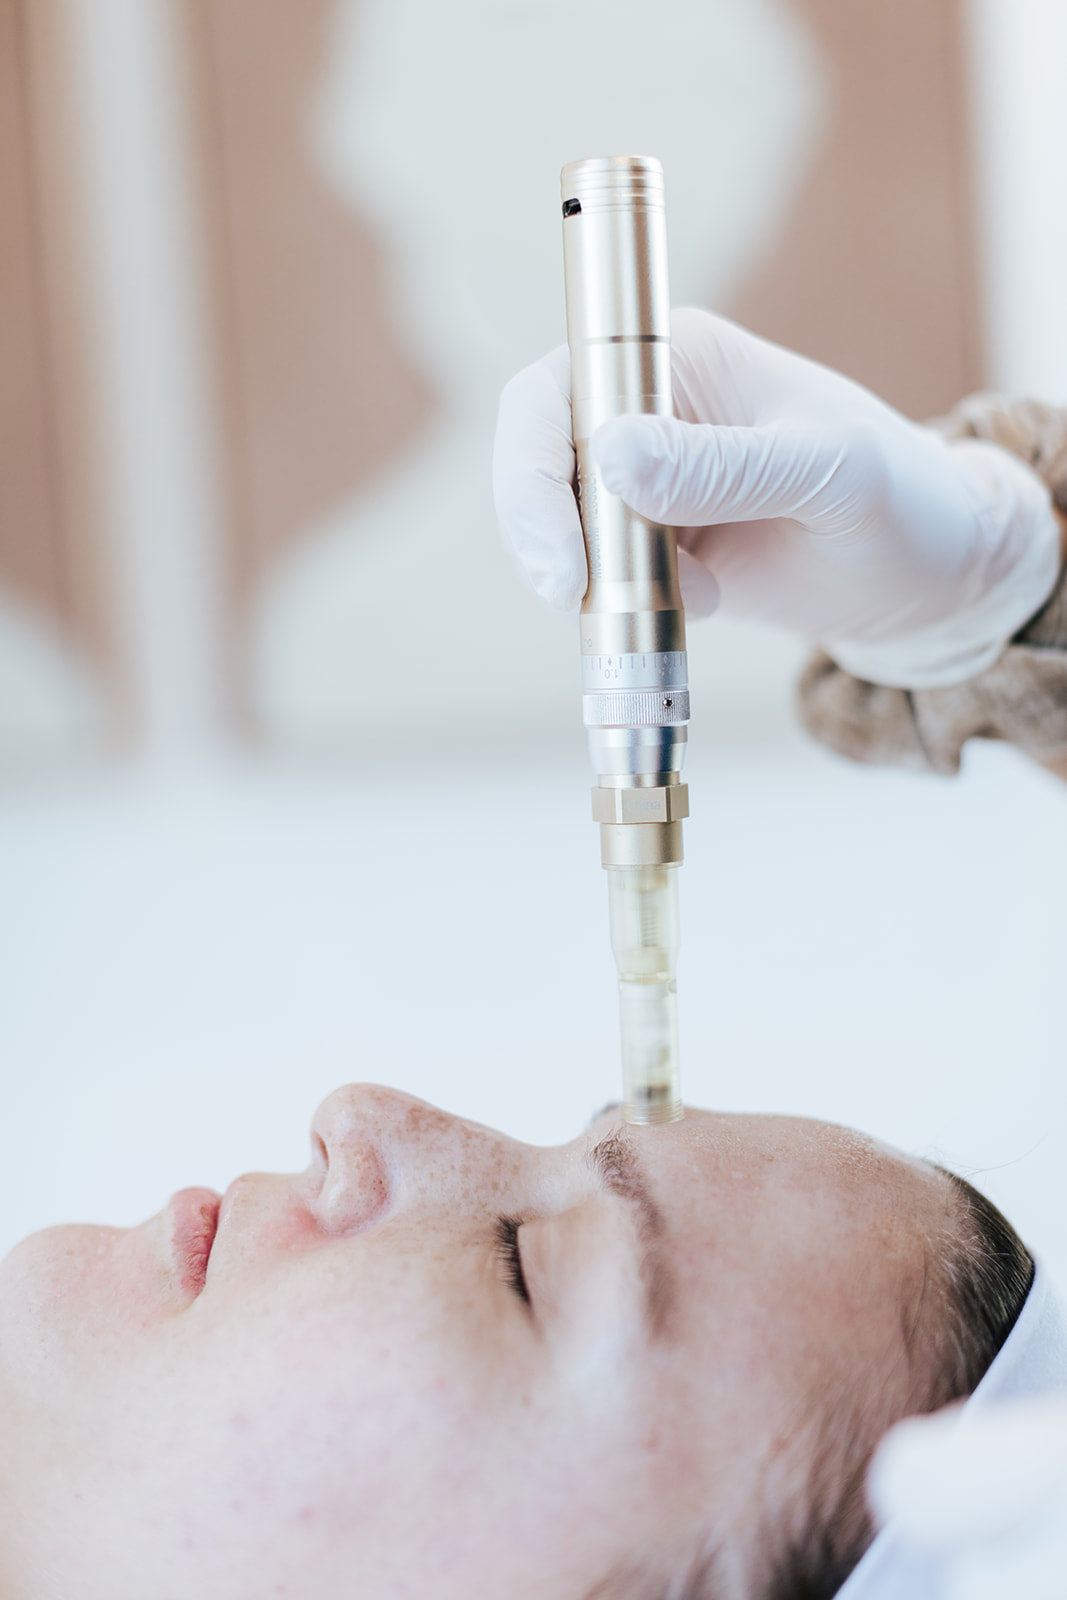 Makeup After Microneedling: What You Need to Know